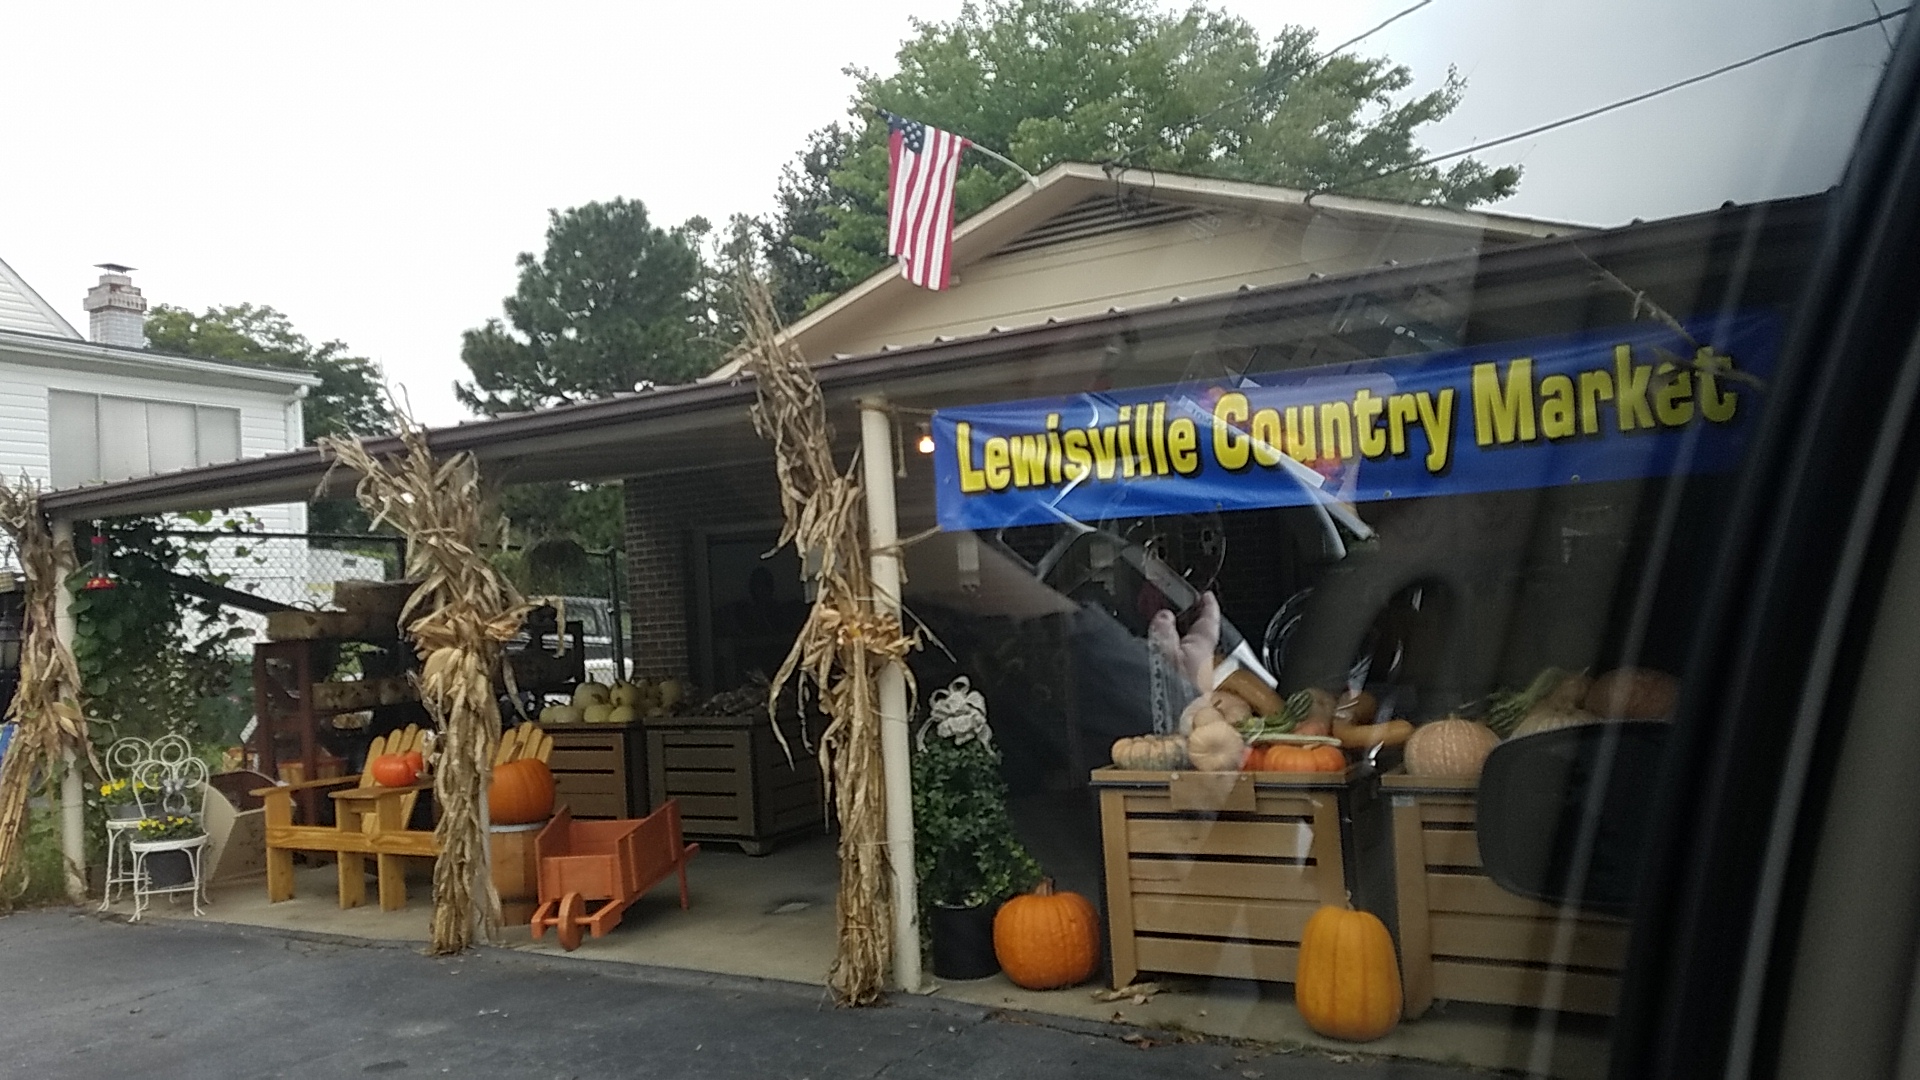 Lewisville Country Market